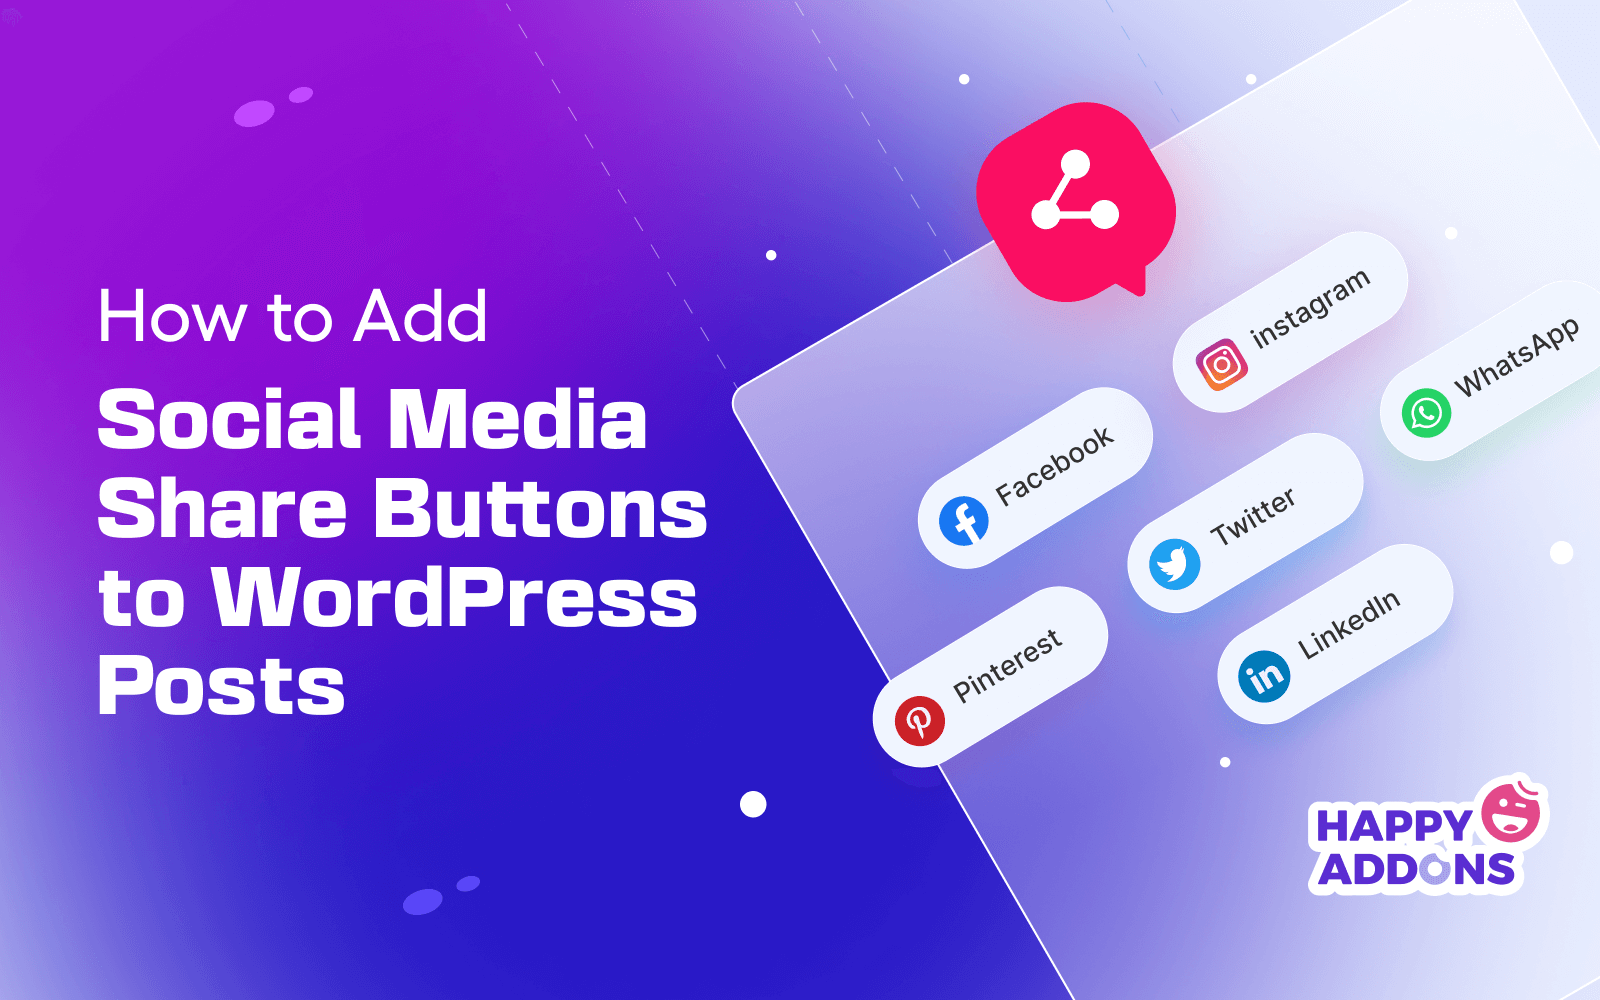 How to Add Social Media Share Buttons to WordPress Posts